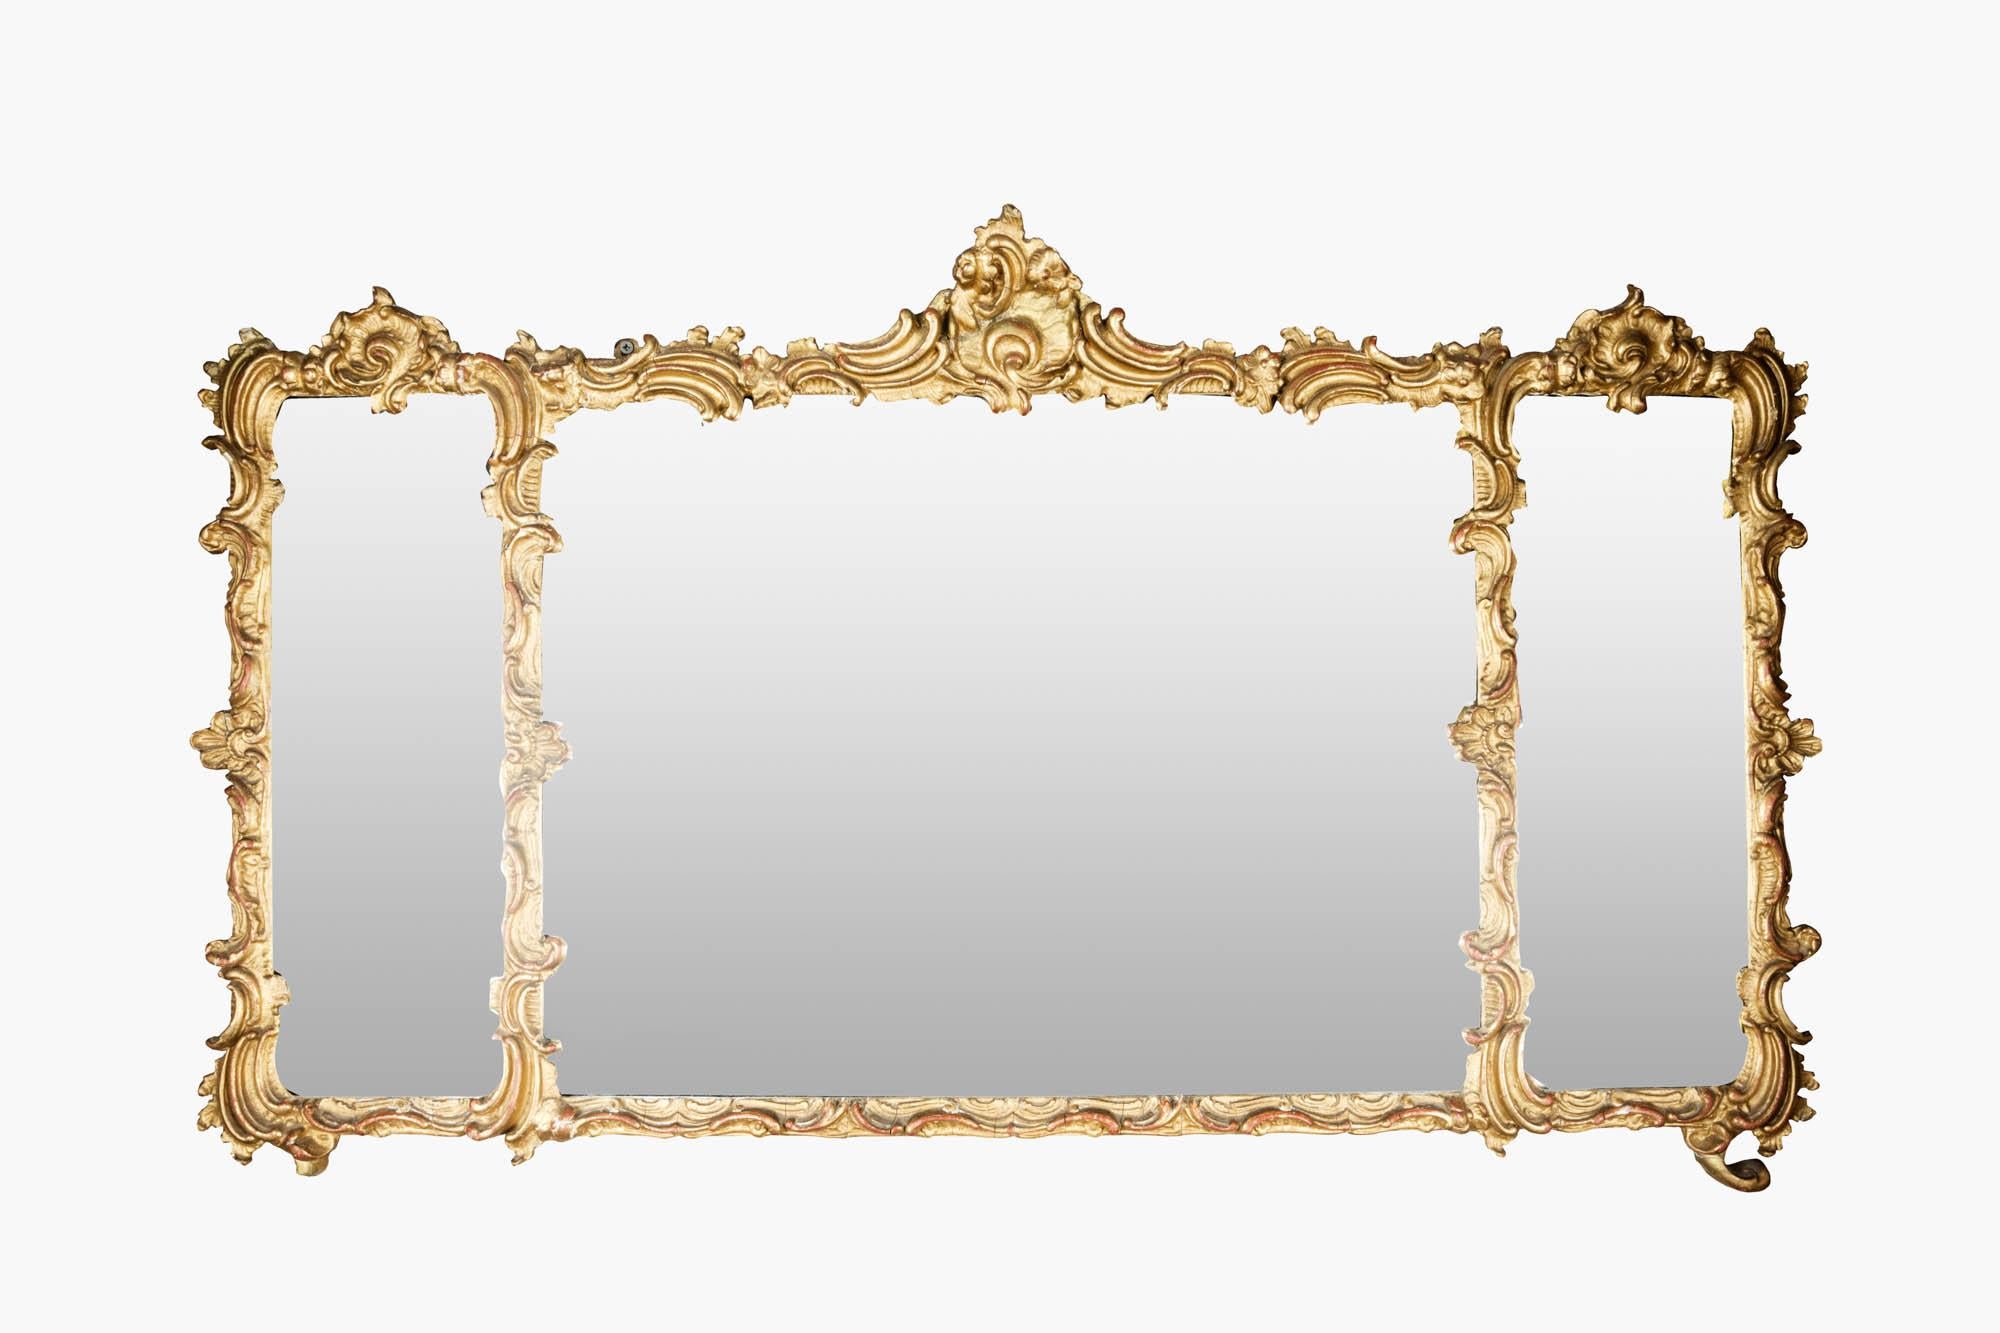 19th Century Ornately Decorated Regency Gilt Overmantel Mirror In Excellent Condition For Sale In Dublin 8, IE